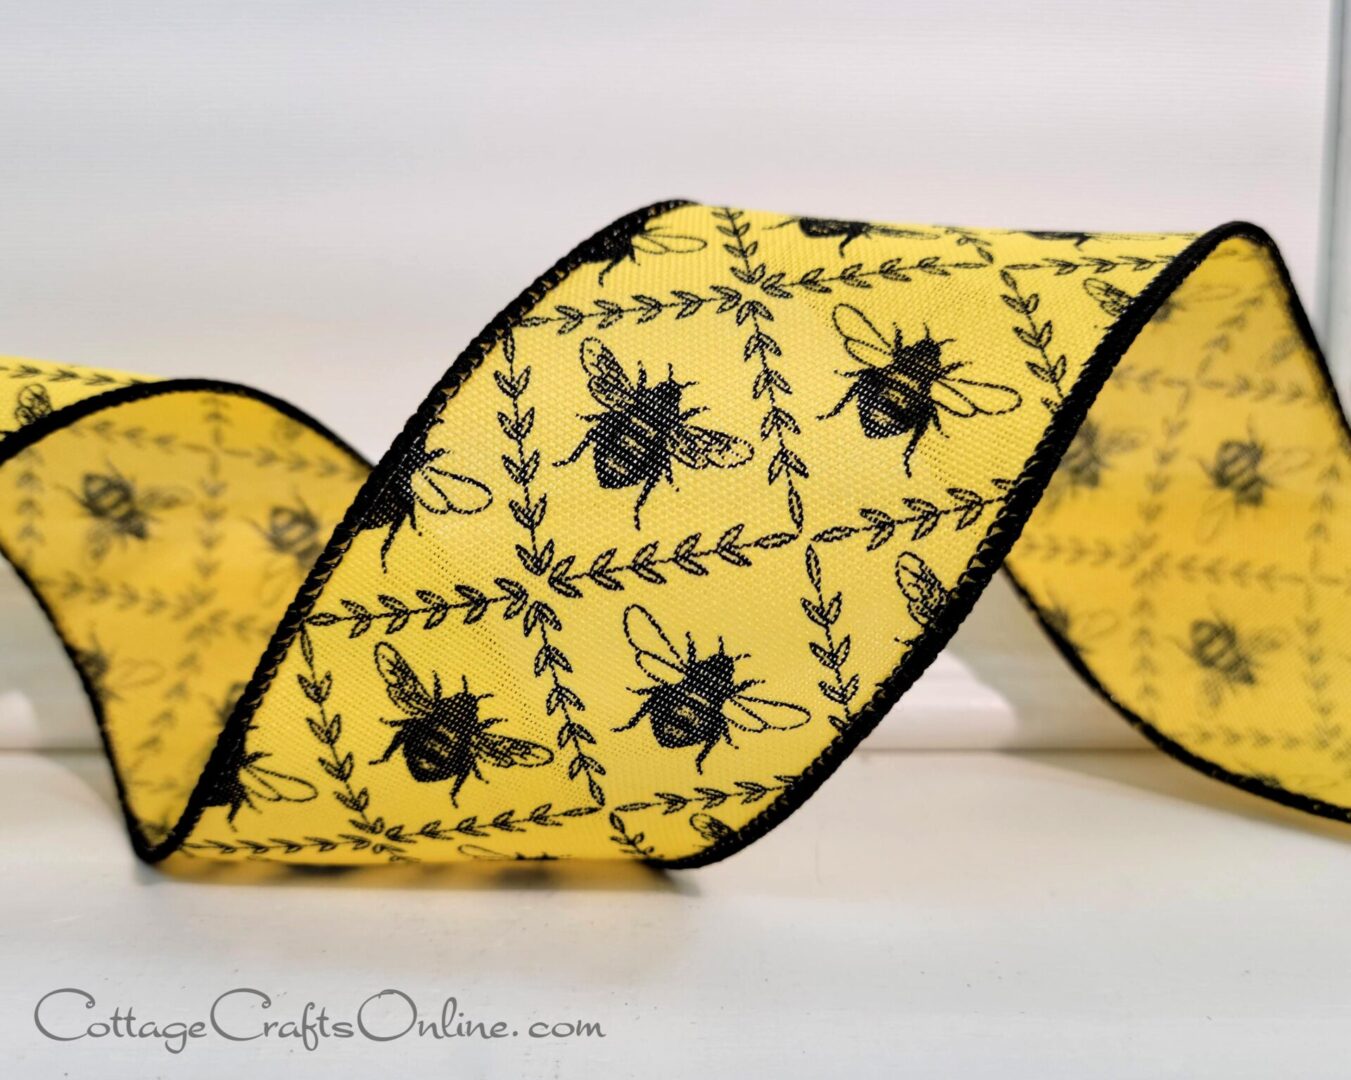 A new holiday ribbon with yellow coloring and a bee design.